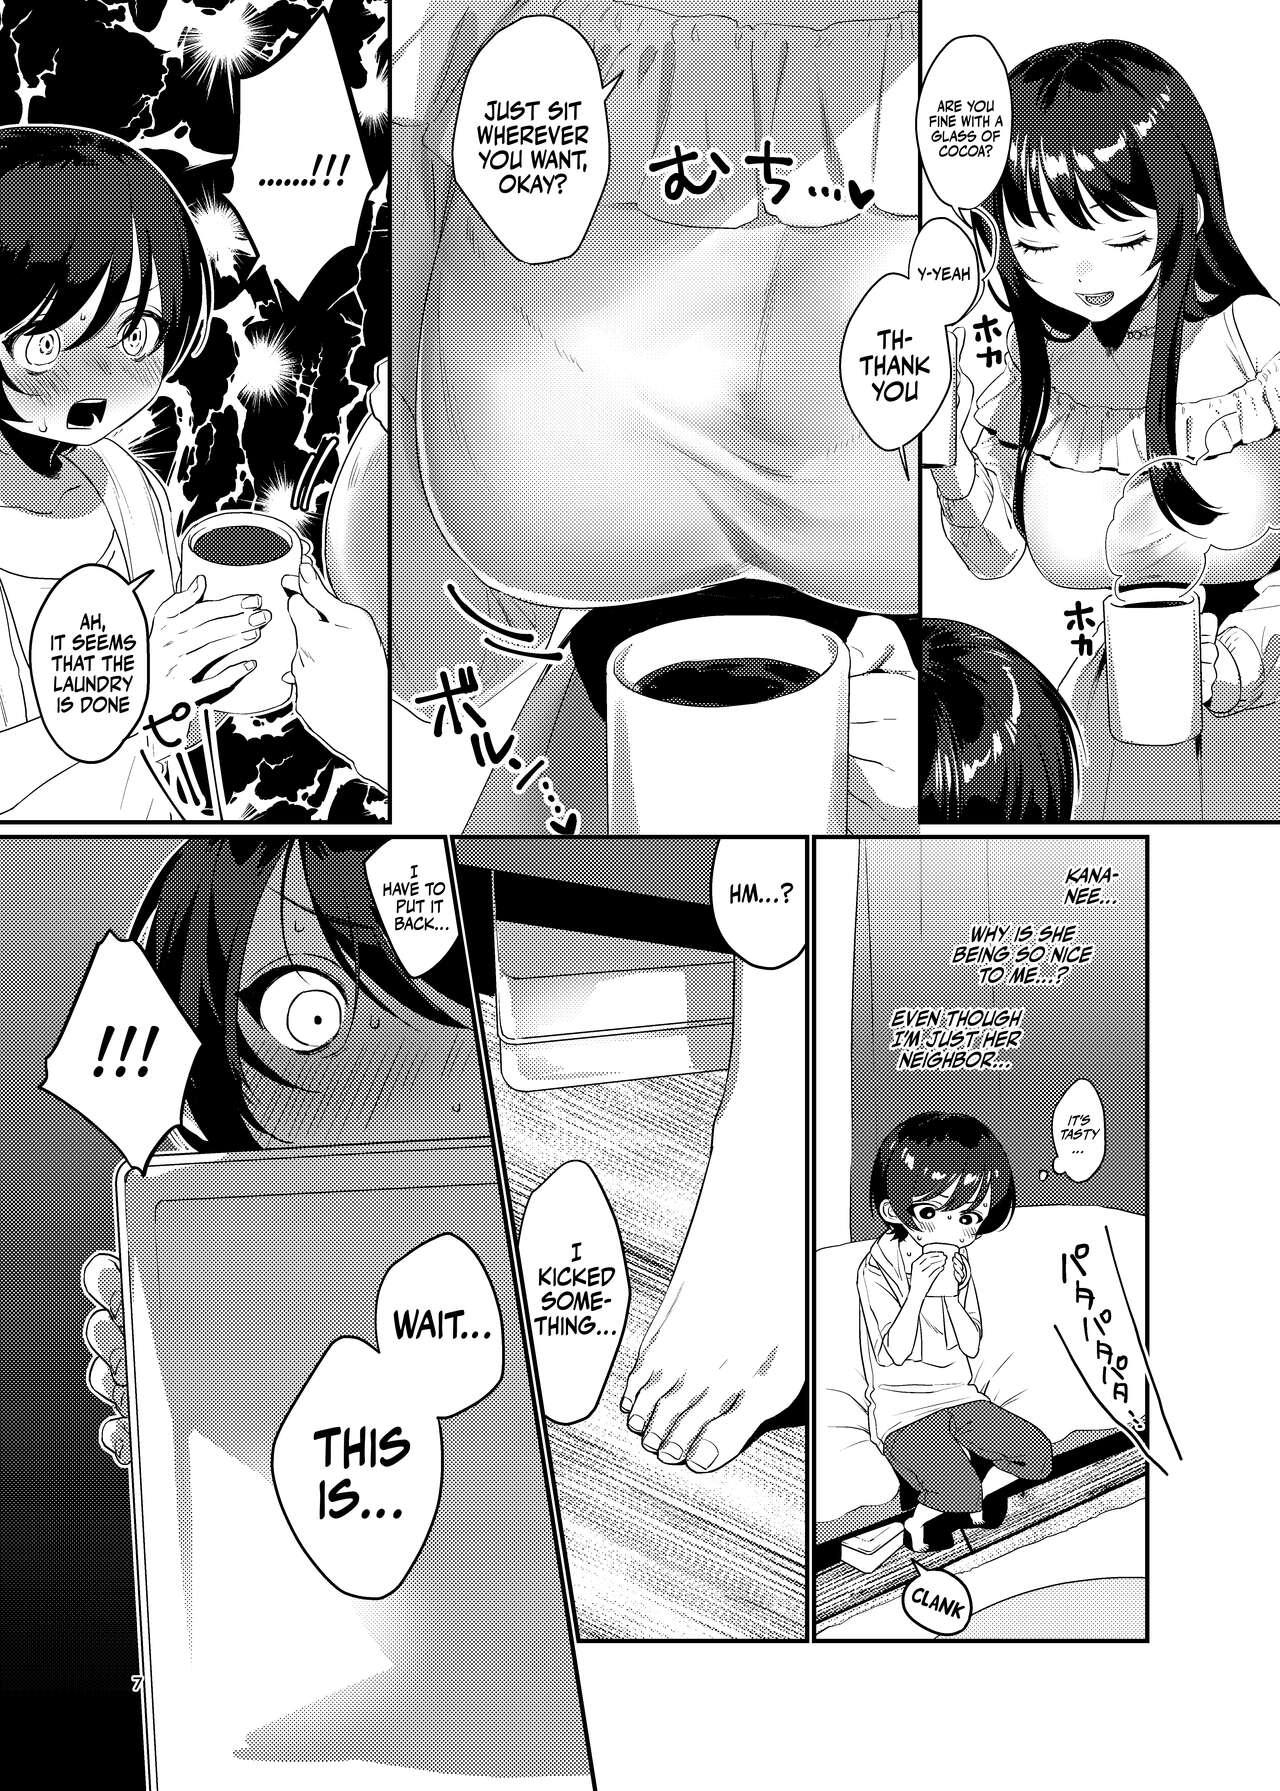 Best Blowjobs Ame, Nochi to Nari no Onee-san | Ame, Later Sister - Original Fellatio - Page 6